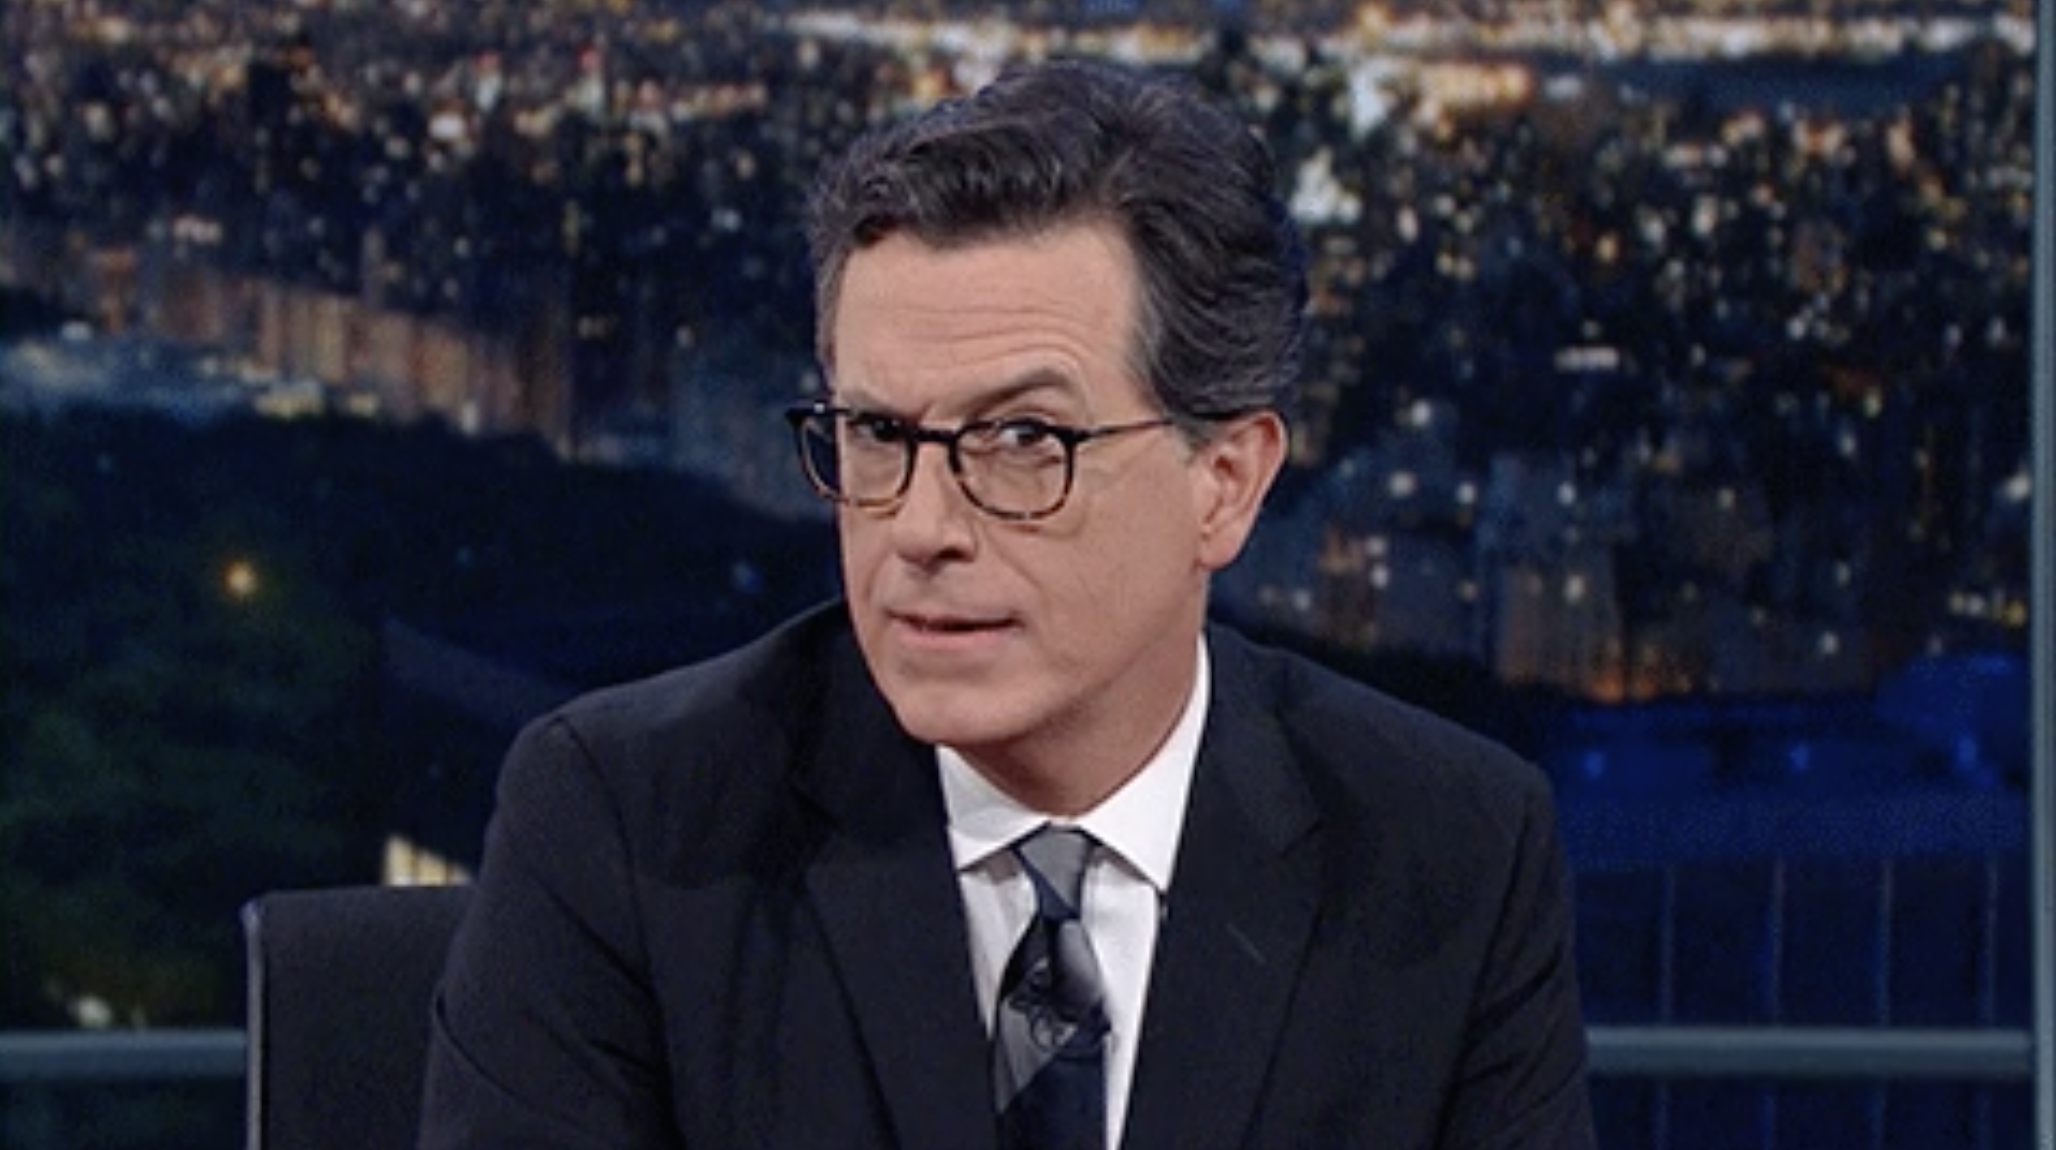 Stephen Colbert hosting &quot;The Late Show&quot;